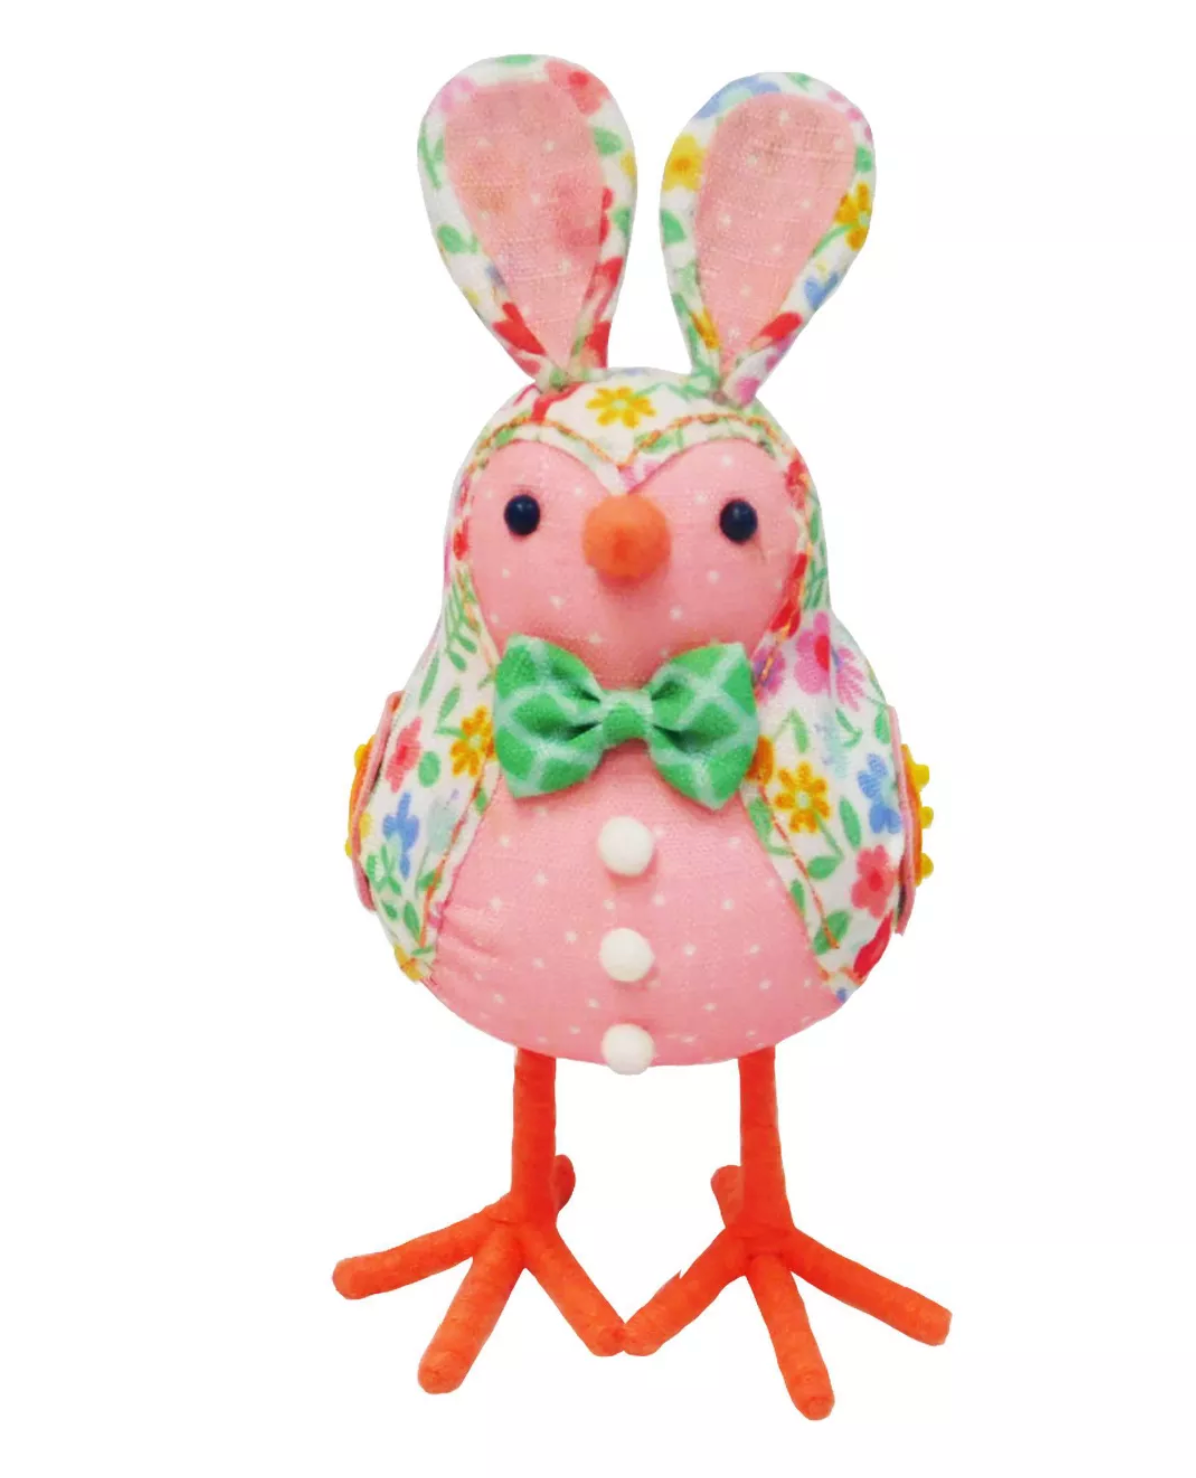 Easter 2021 Spritz Featherly Friends Fabric Bird Bunny Target New with Tag